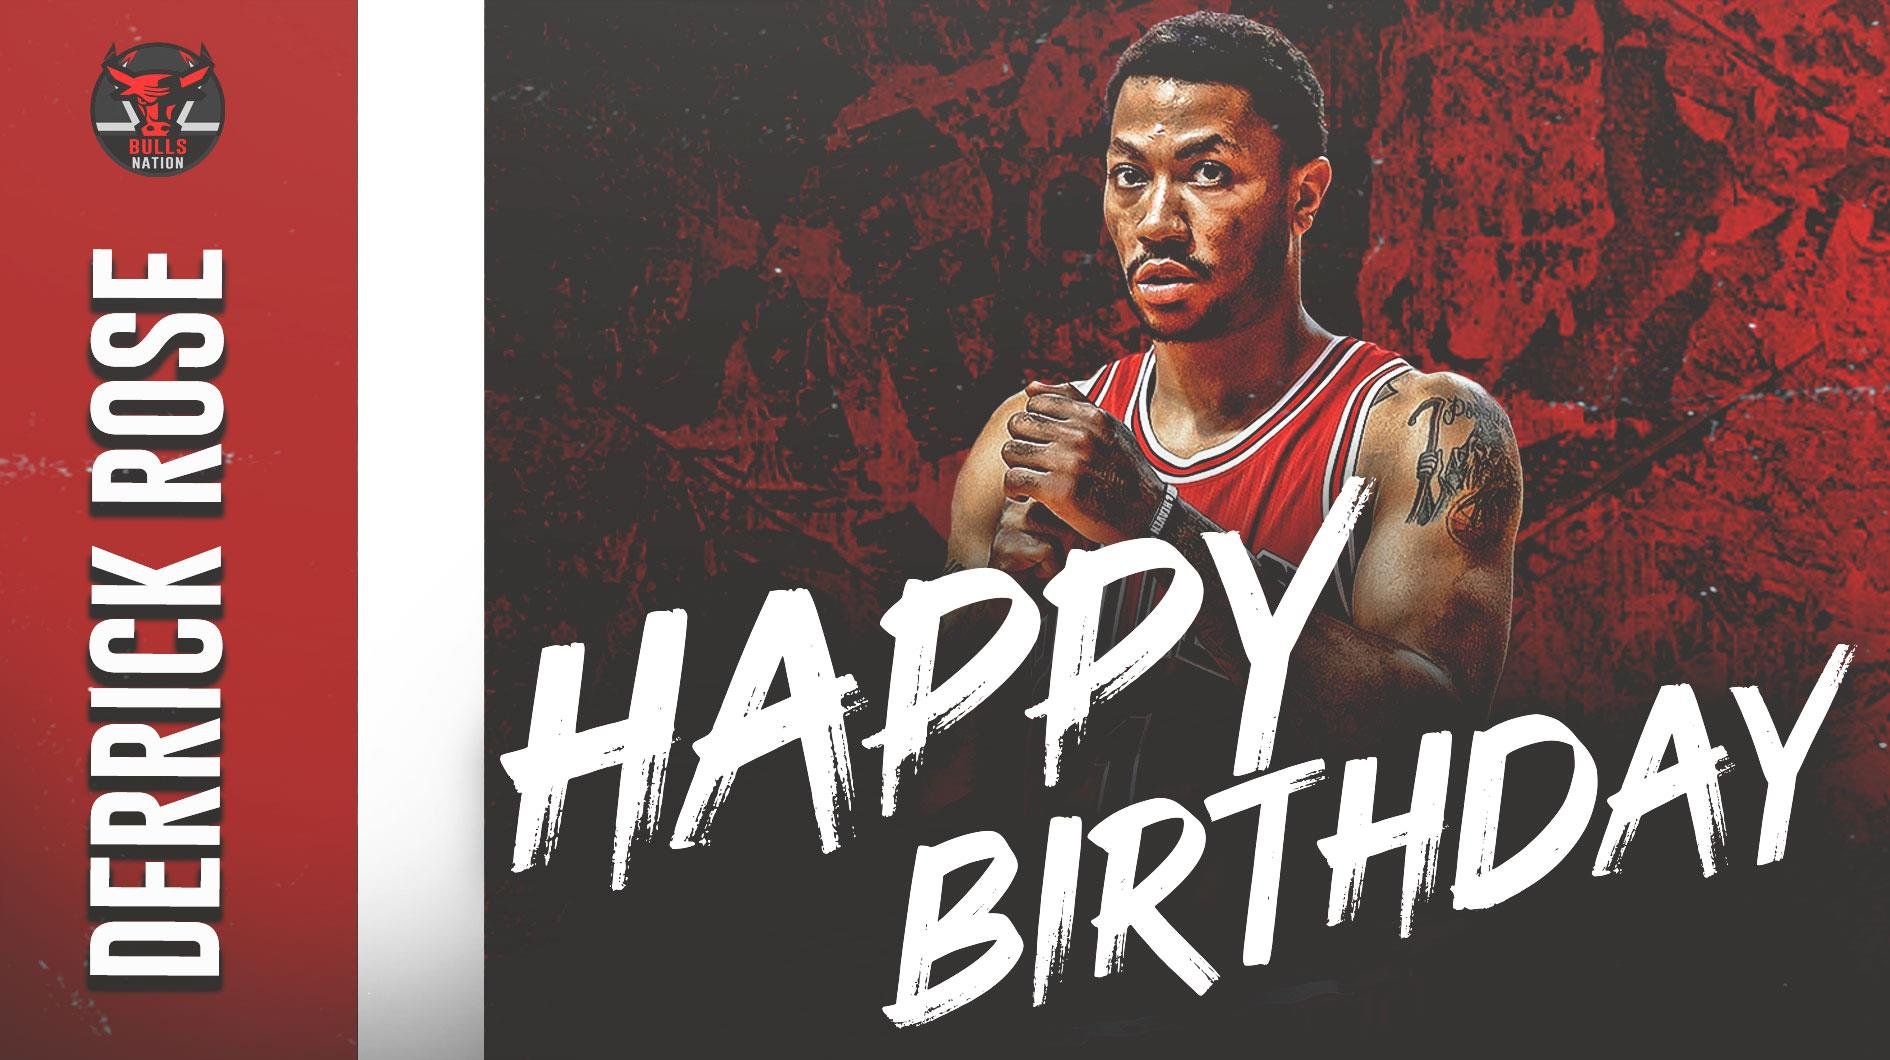 Join Bulls Nation in wishing Derrick Rose a happy 32nd birthday! 